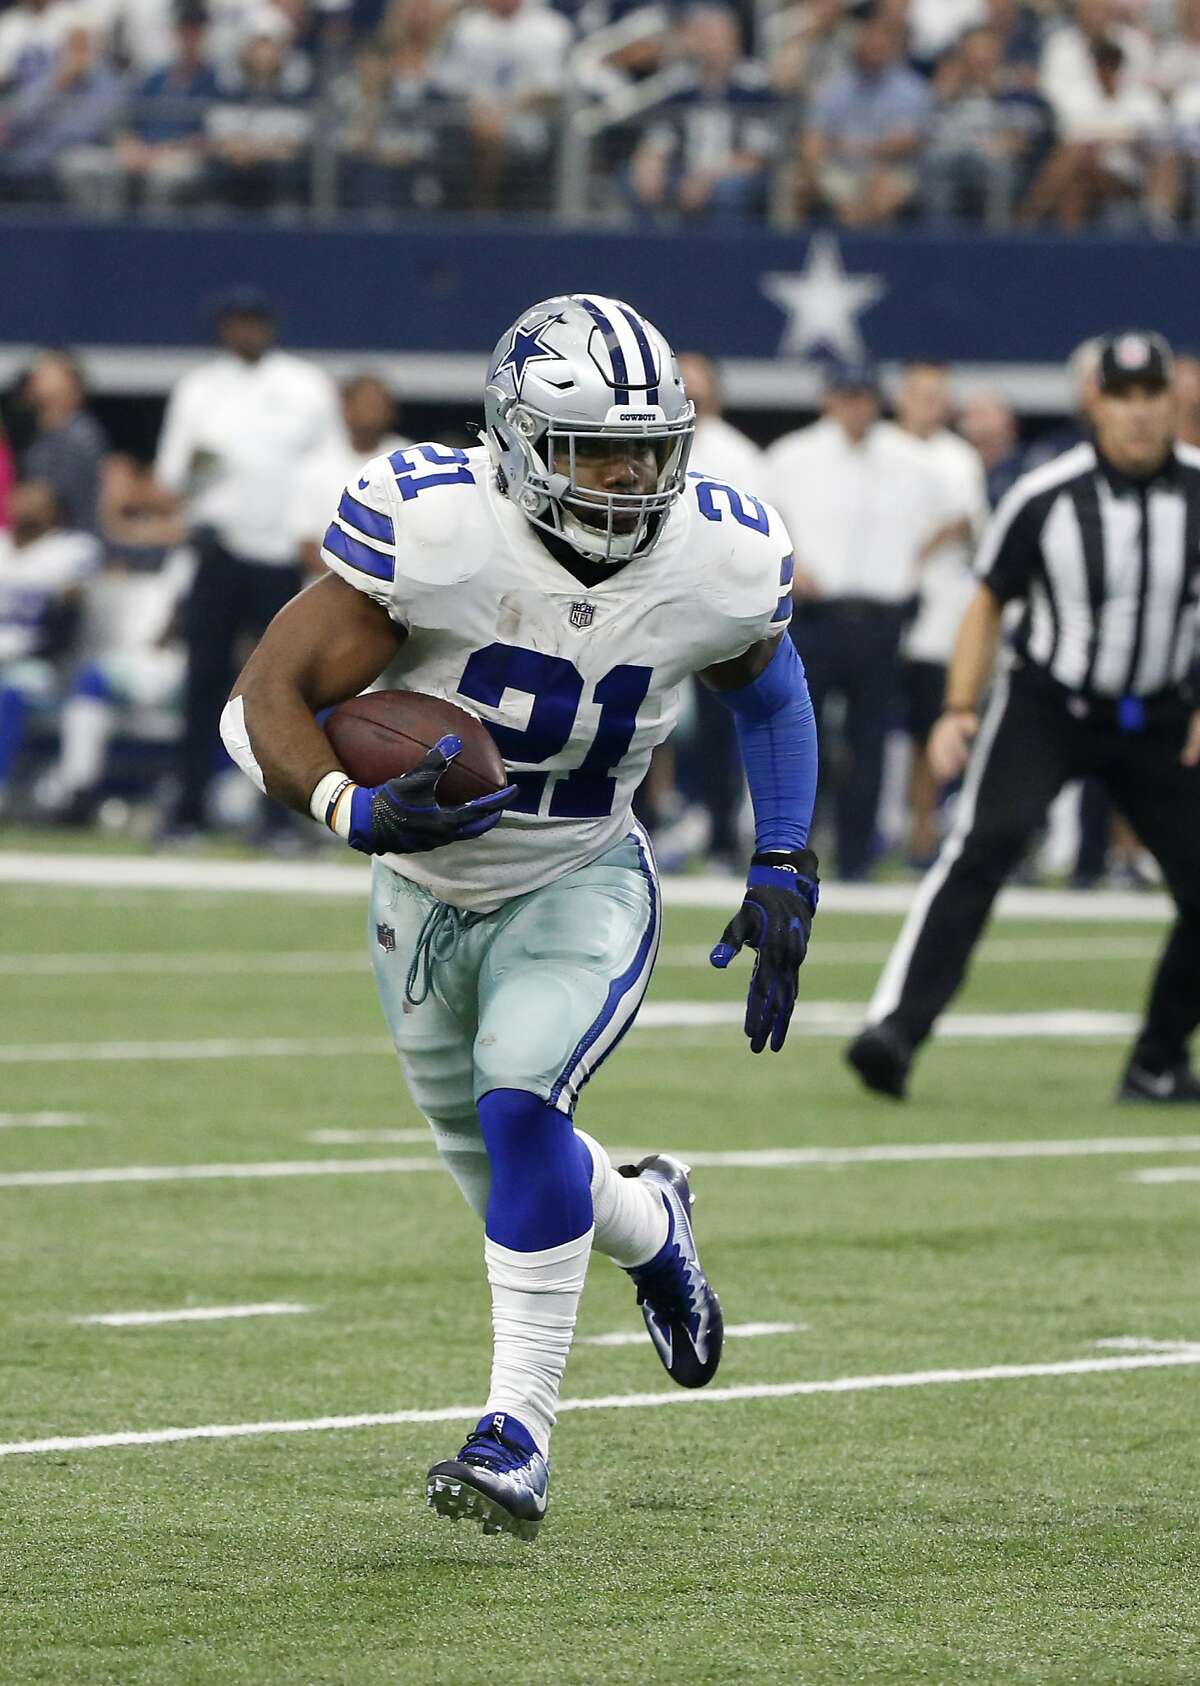 Dallas Cowboys' Ezekiel Elliott (21) carries the ball against the Green Bay Packers during an NFL football game, Sunday, Oct. 8, 2017, in Arlington, Texas. (AP Photo/Michael Ainsworth)